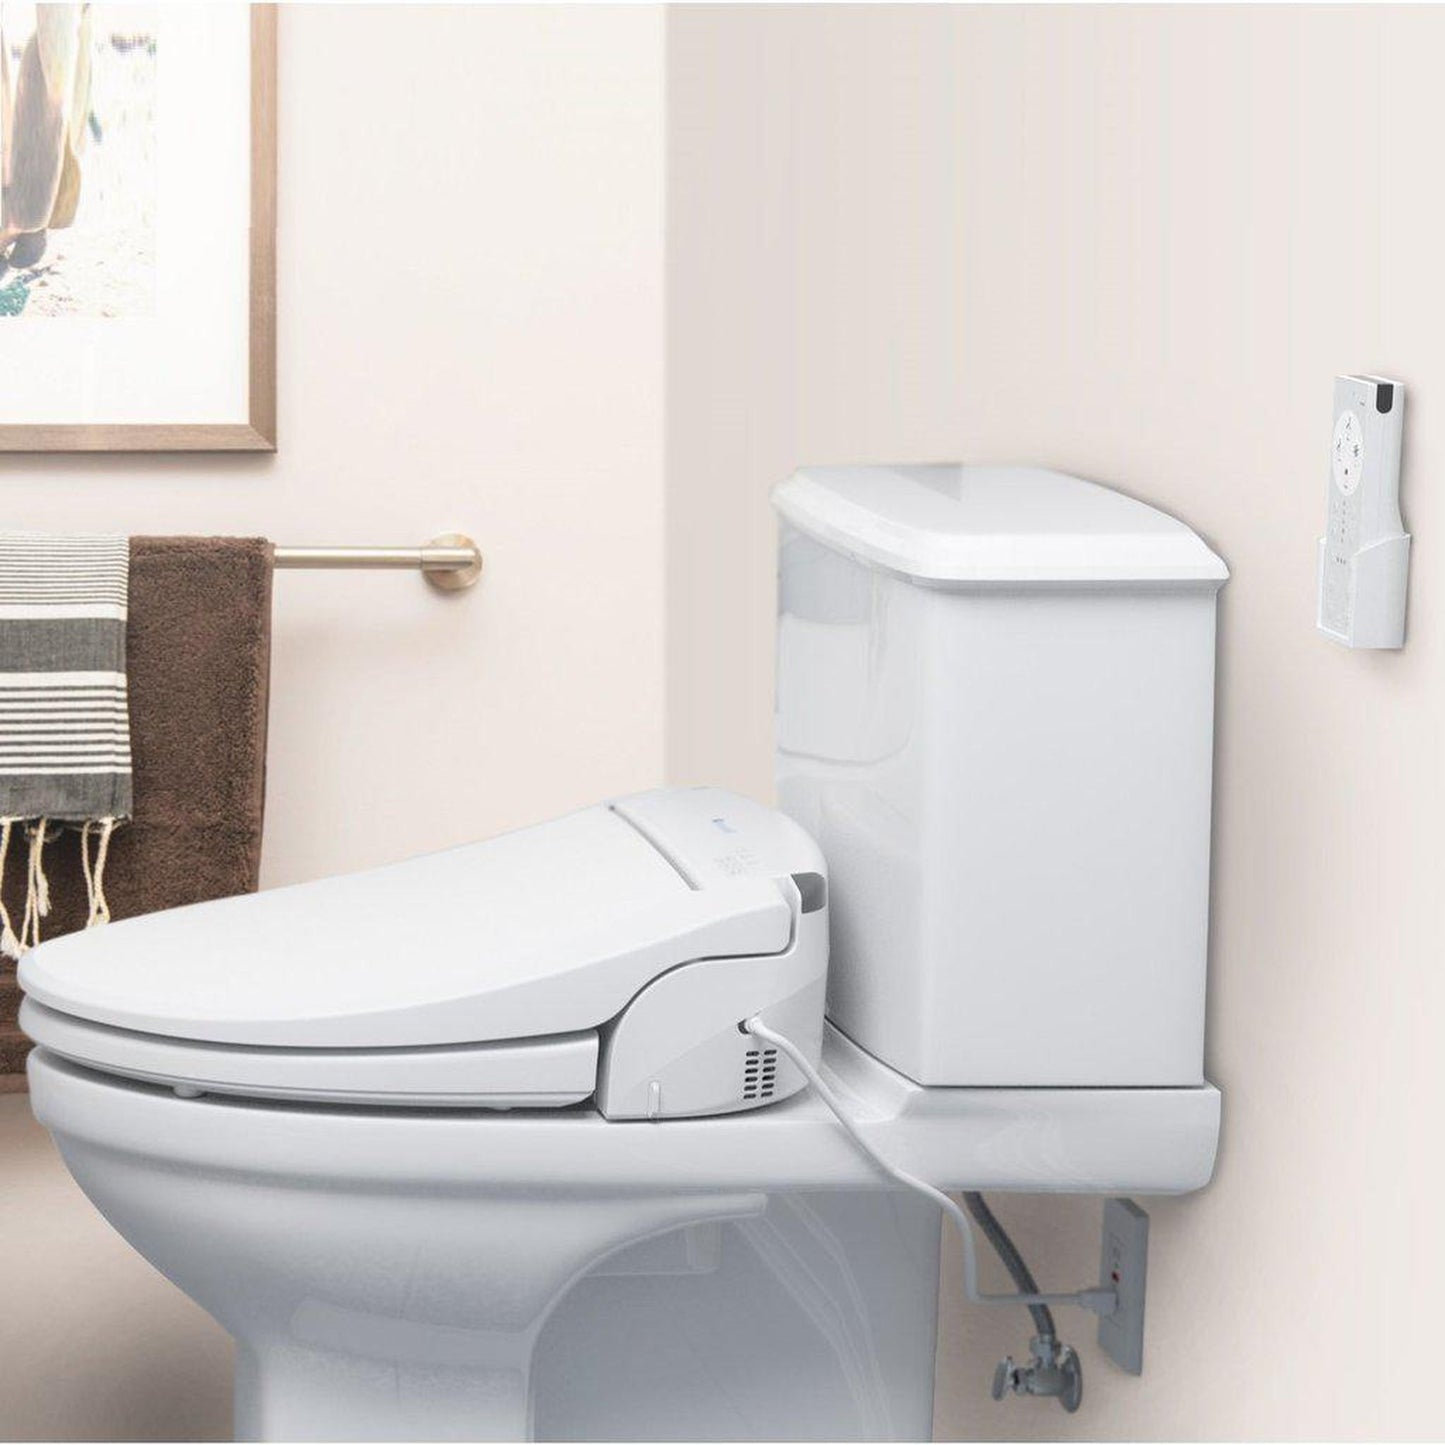 Brondell Swash DS725 20.87" White Elongated Electric Advanced Bidet Toilet Seat With Wireless Remote Control